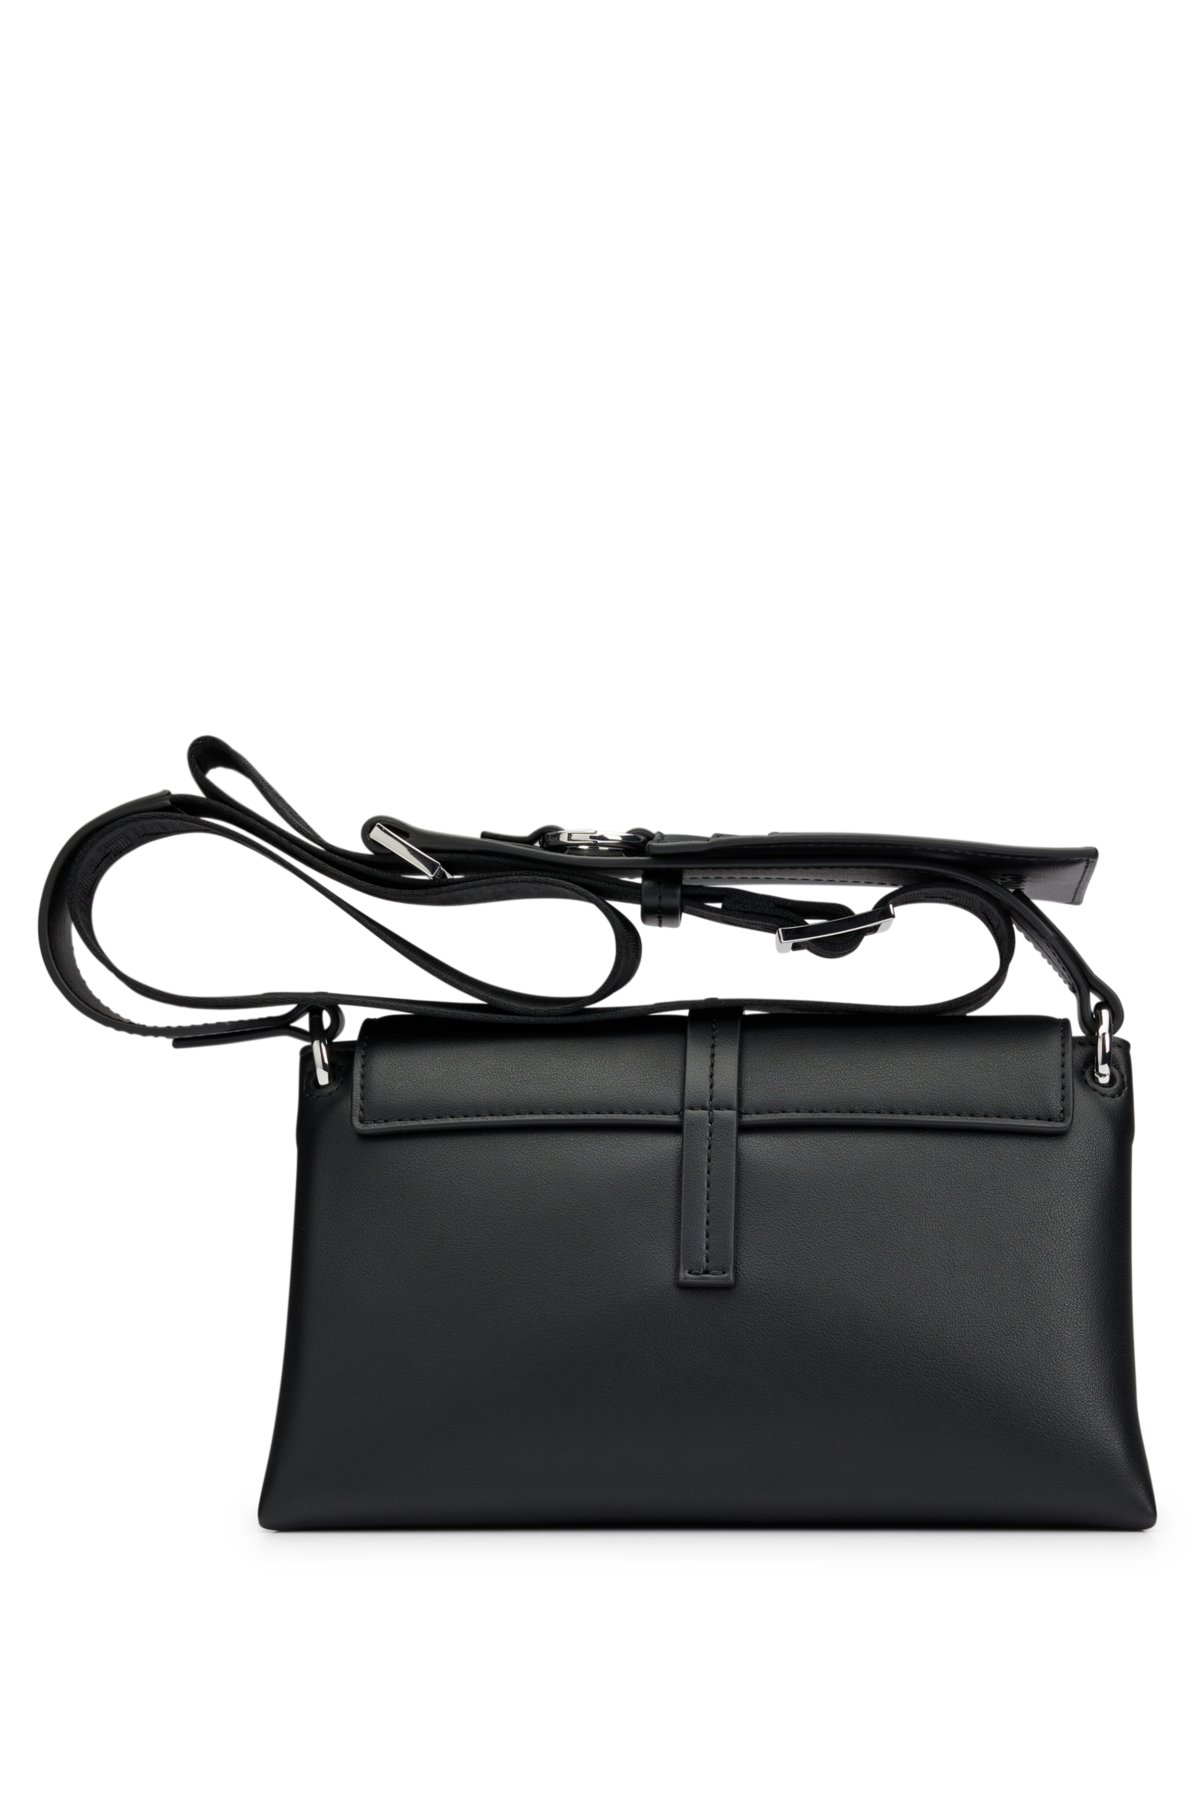 Faux-leather crossbody bag with detachable card holder, Black